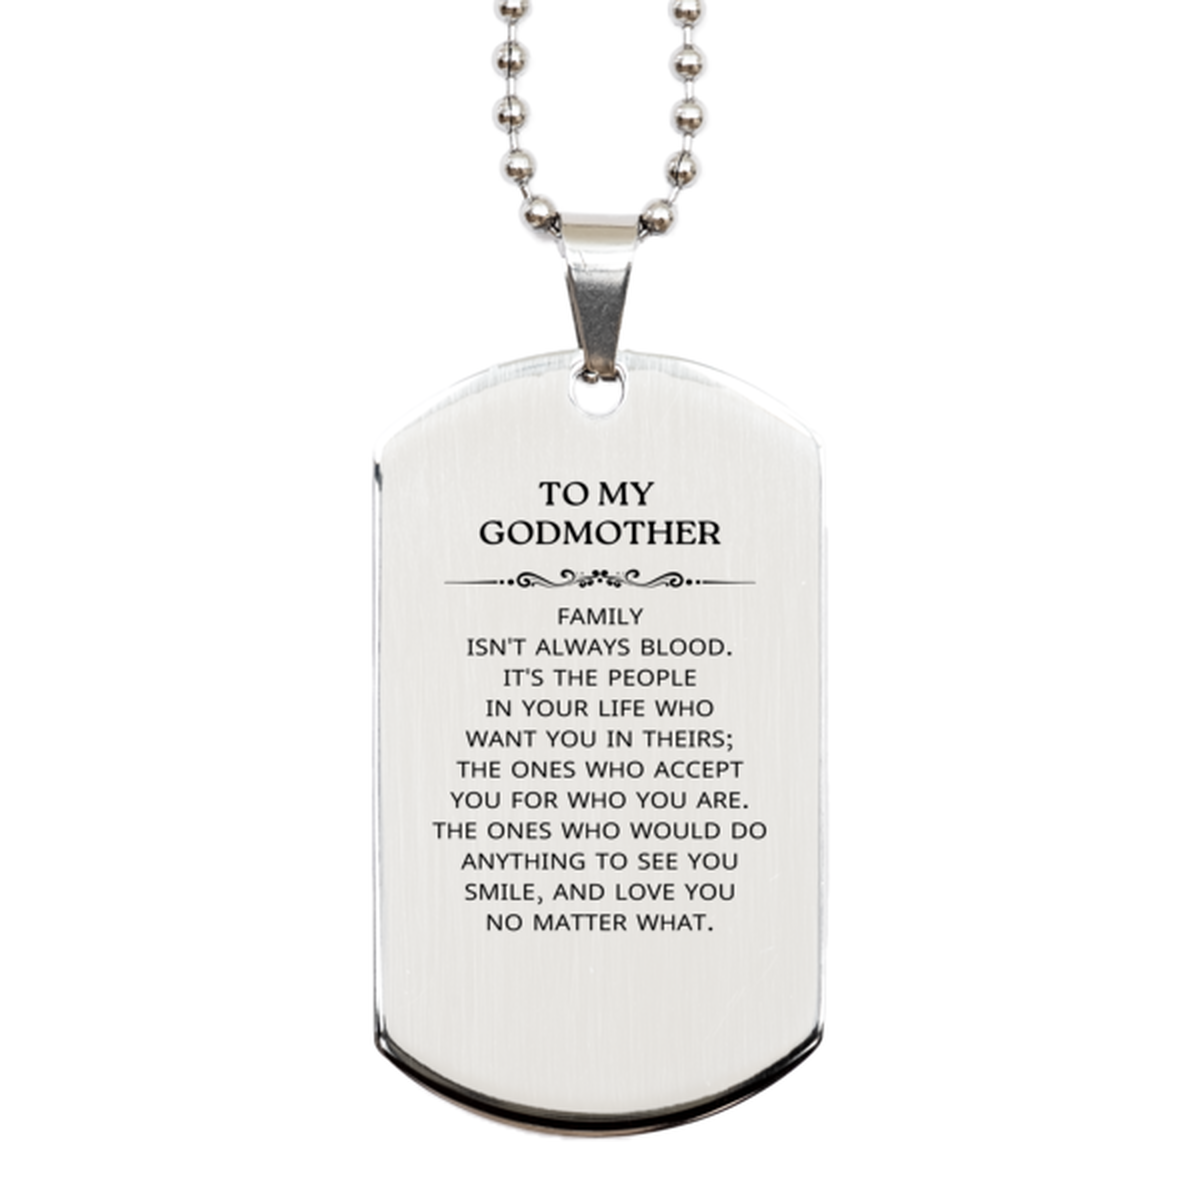 To My Godmother Gifts, Family isn't always blood, Godmother Silver Dog Tag, Birthday Christmas Unique Present For Godmother